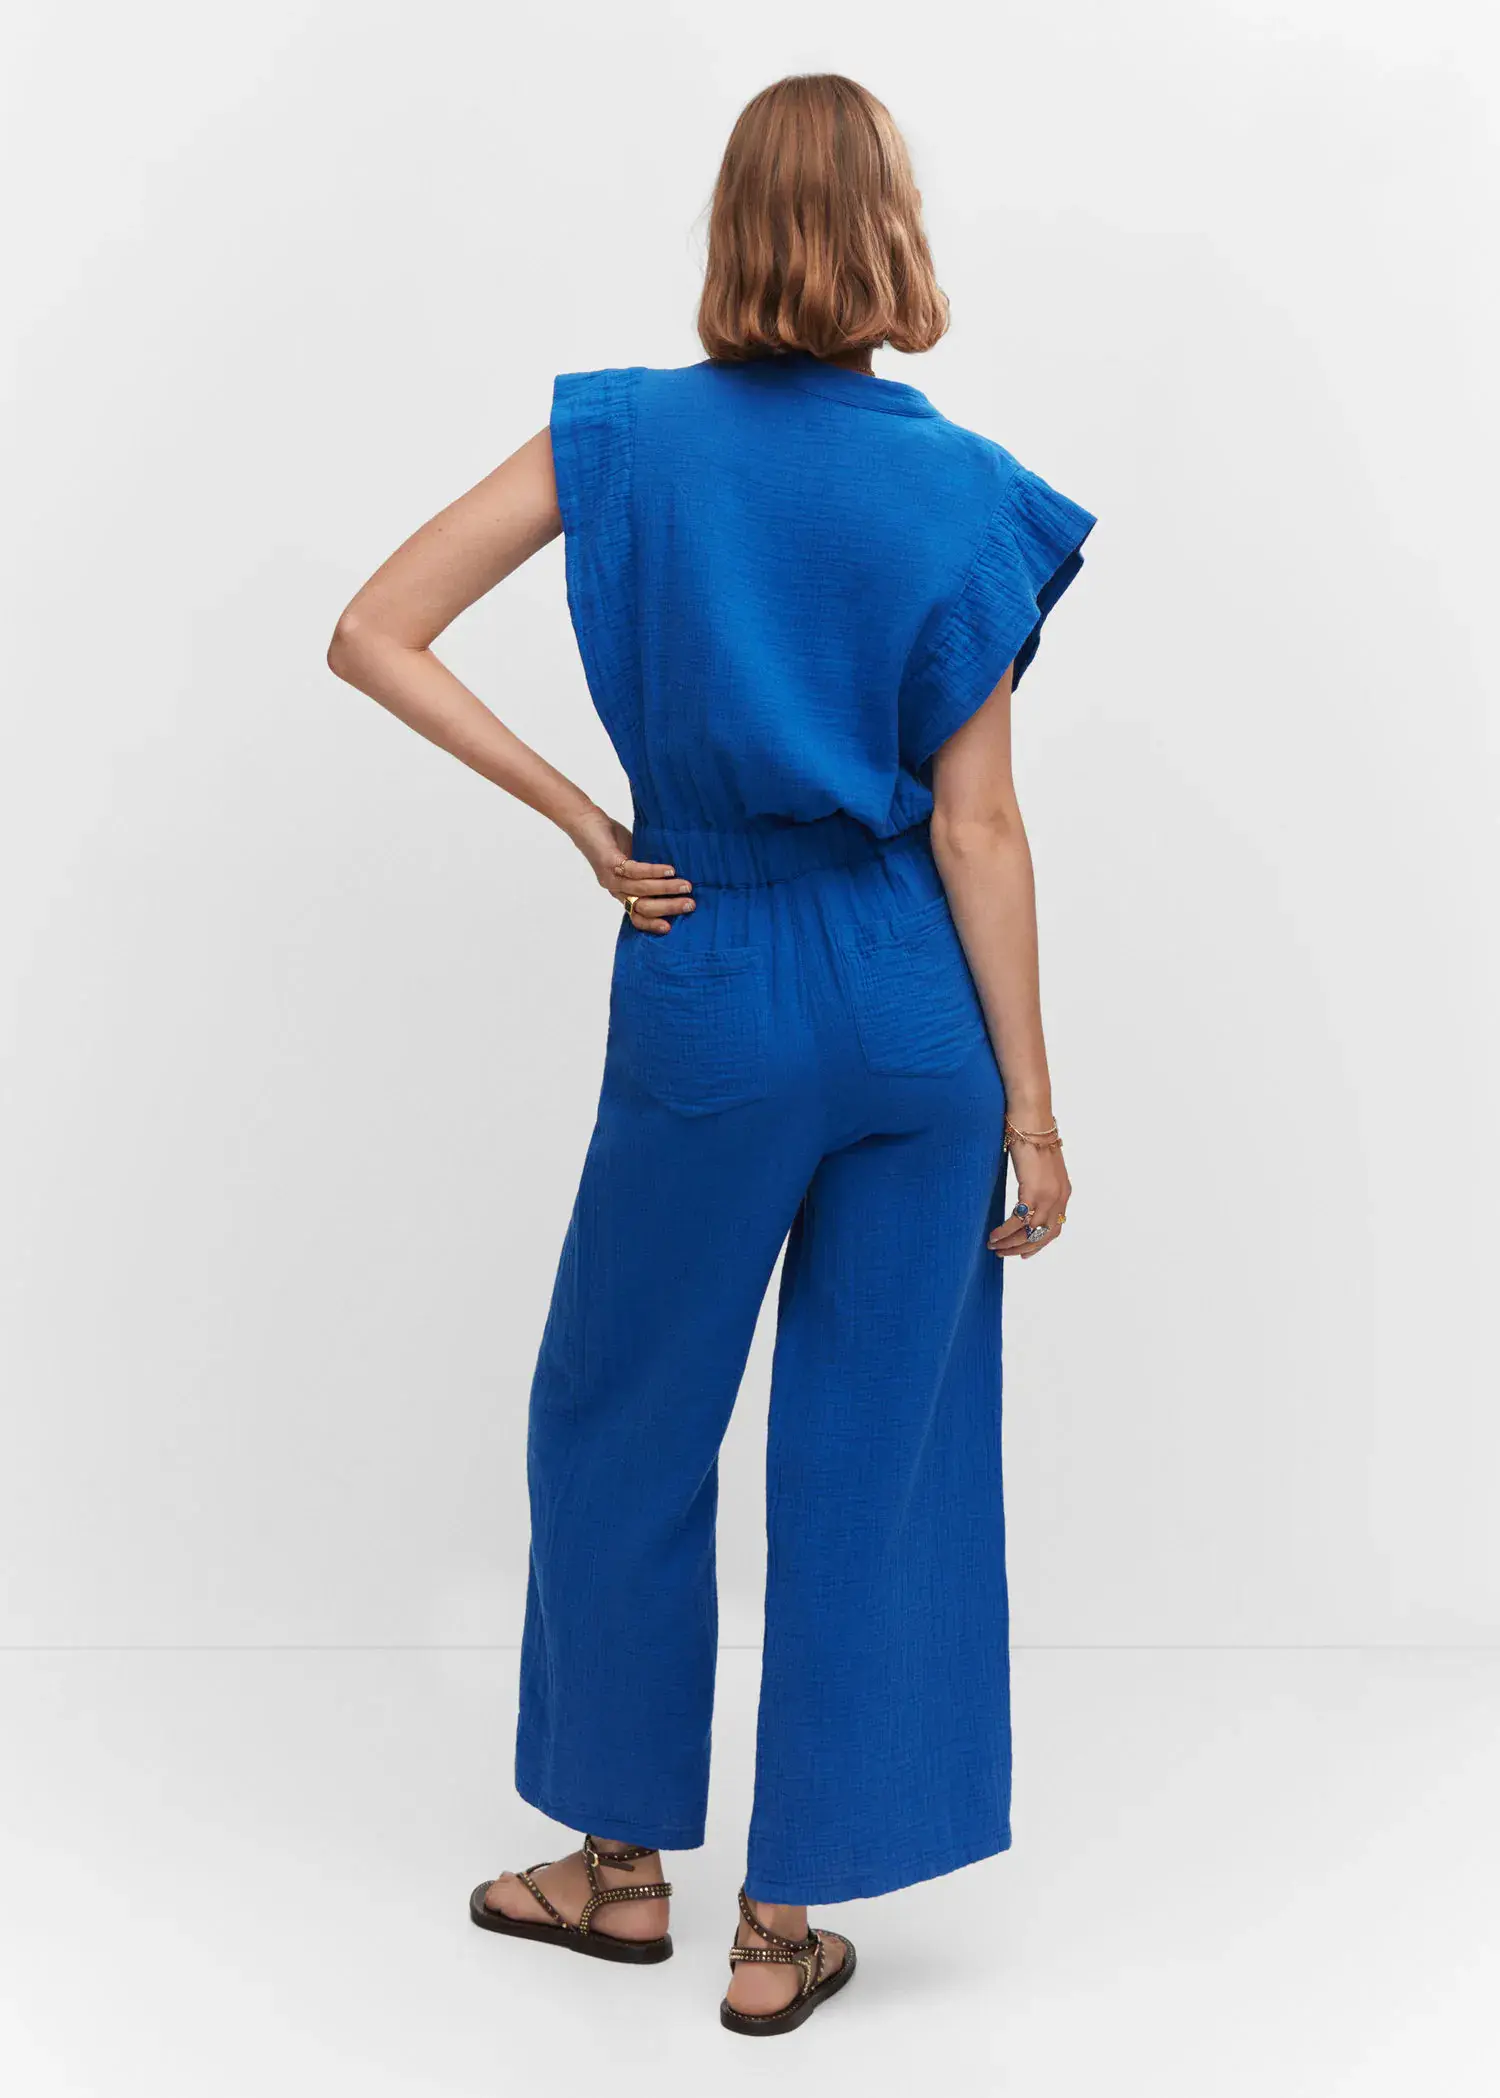 Mango Textured jumpsuit with button. a woman in a blue outfit standing in front of a white wall. 